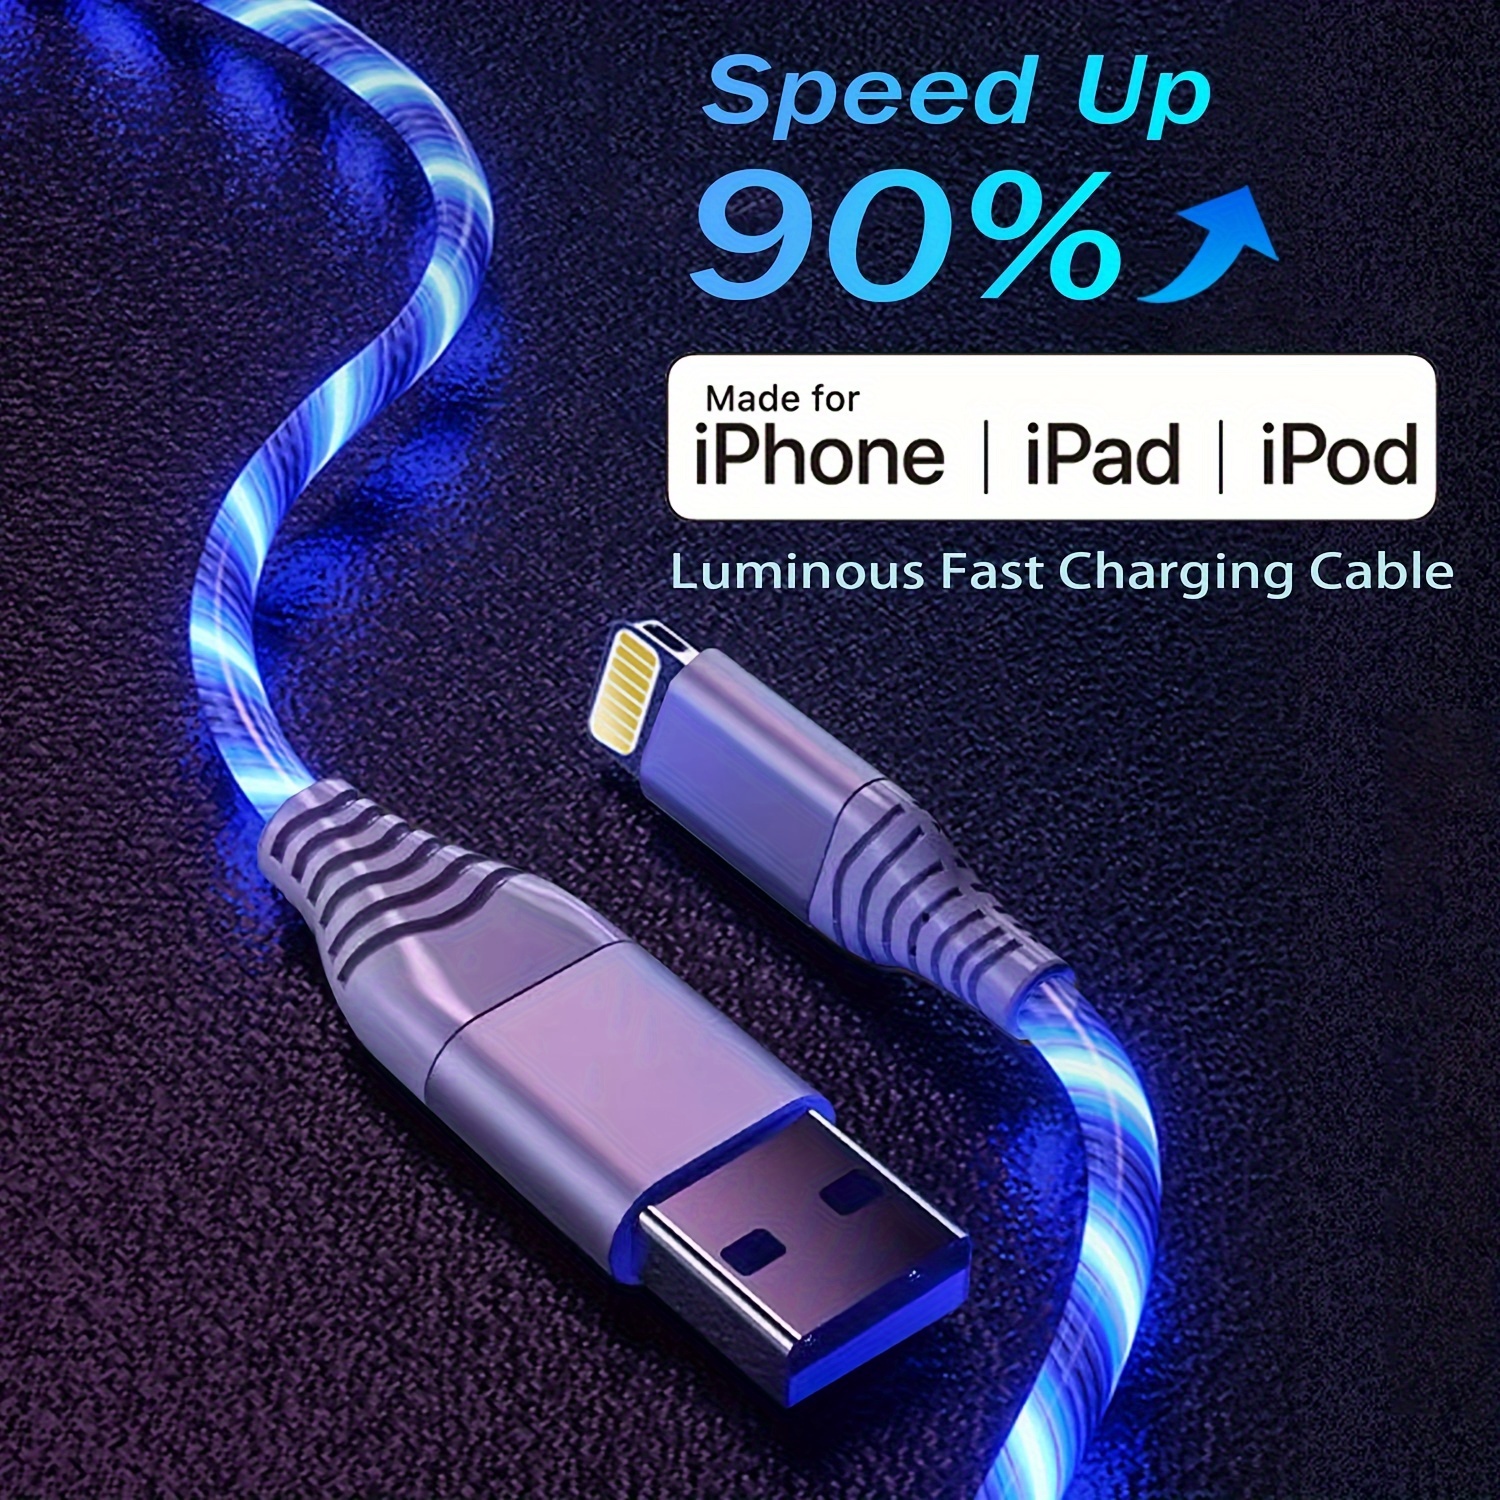 

Led Light-up , Mfi Certified Usb Fast Charge Cord For 14/13/12/11 Pro Max, Xr, Xs, X, 8 Plus, 7 Plus, 6 Plus, 5s, 5c & - Durable Abs Material